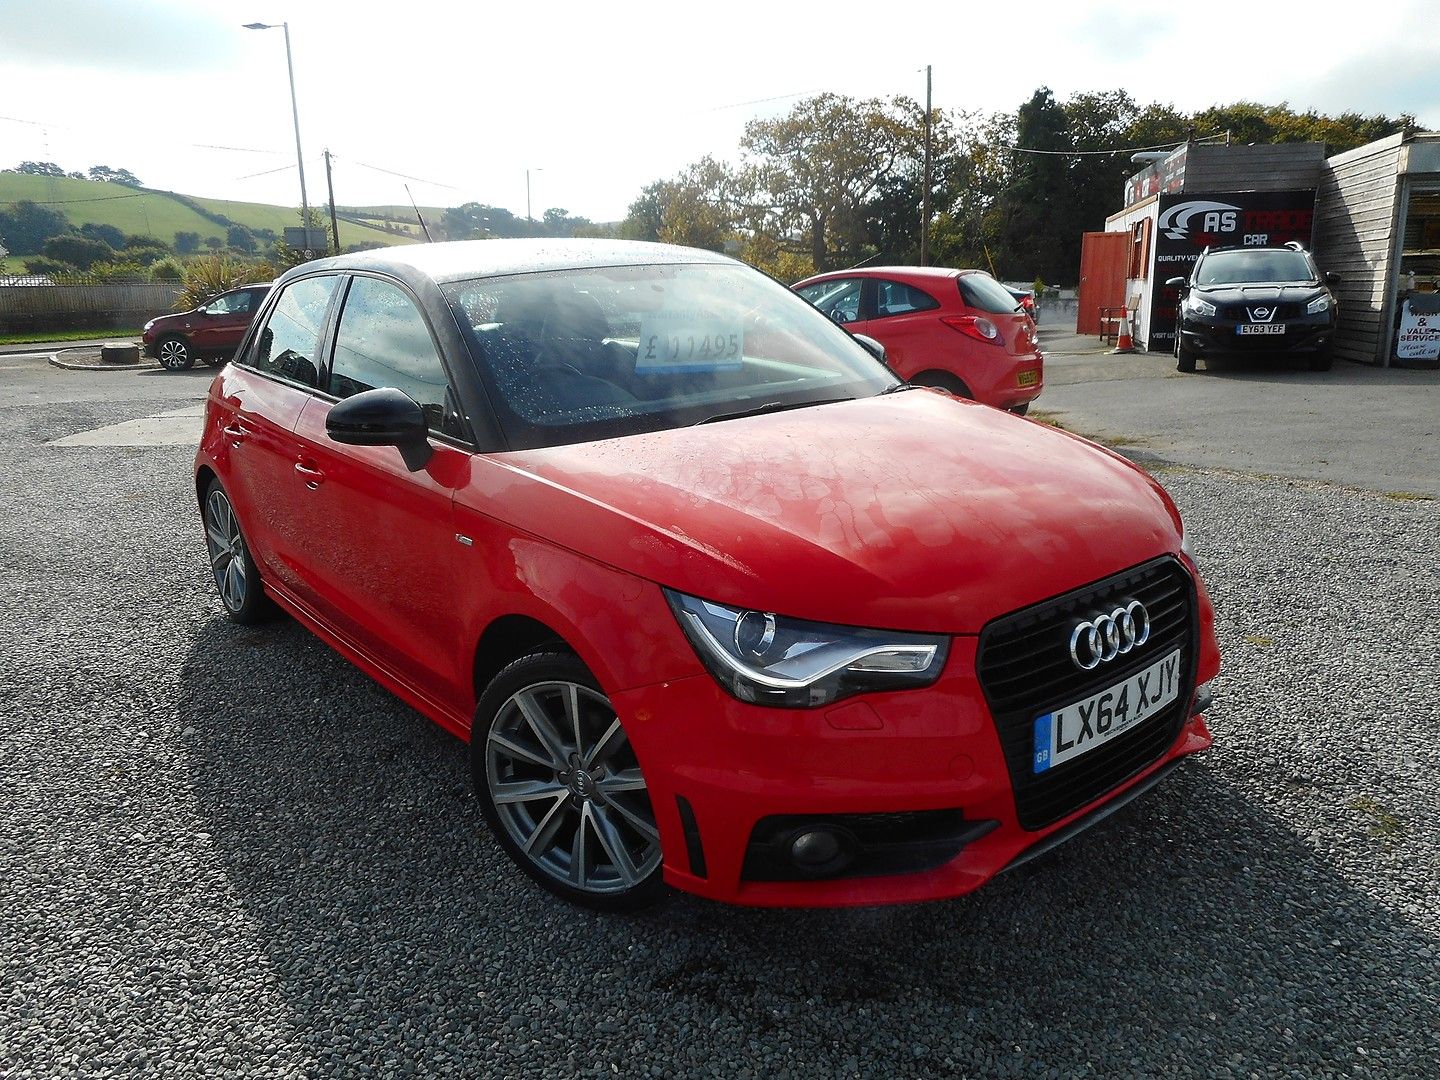 AUDI A1 Sportback 1.4 TFSI S line Style Edition 122PS (2014) - Picture 3